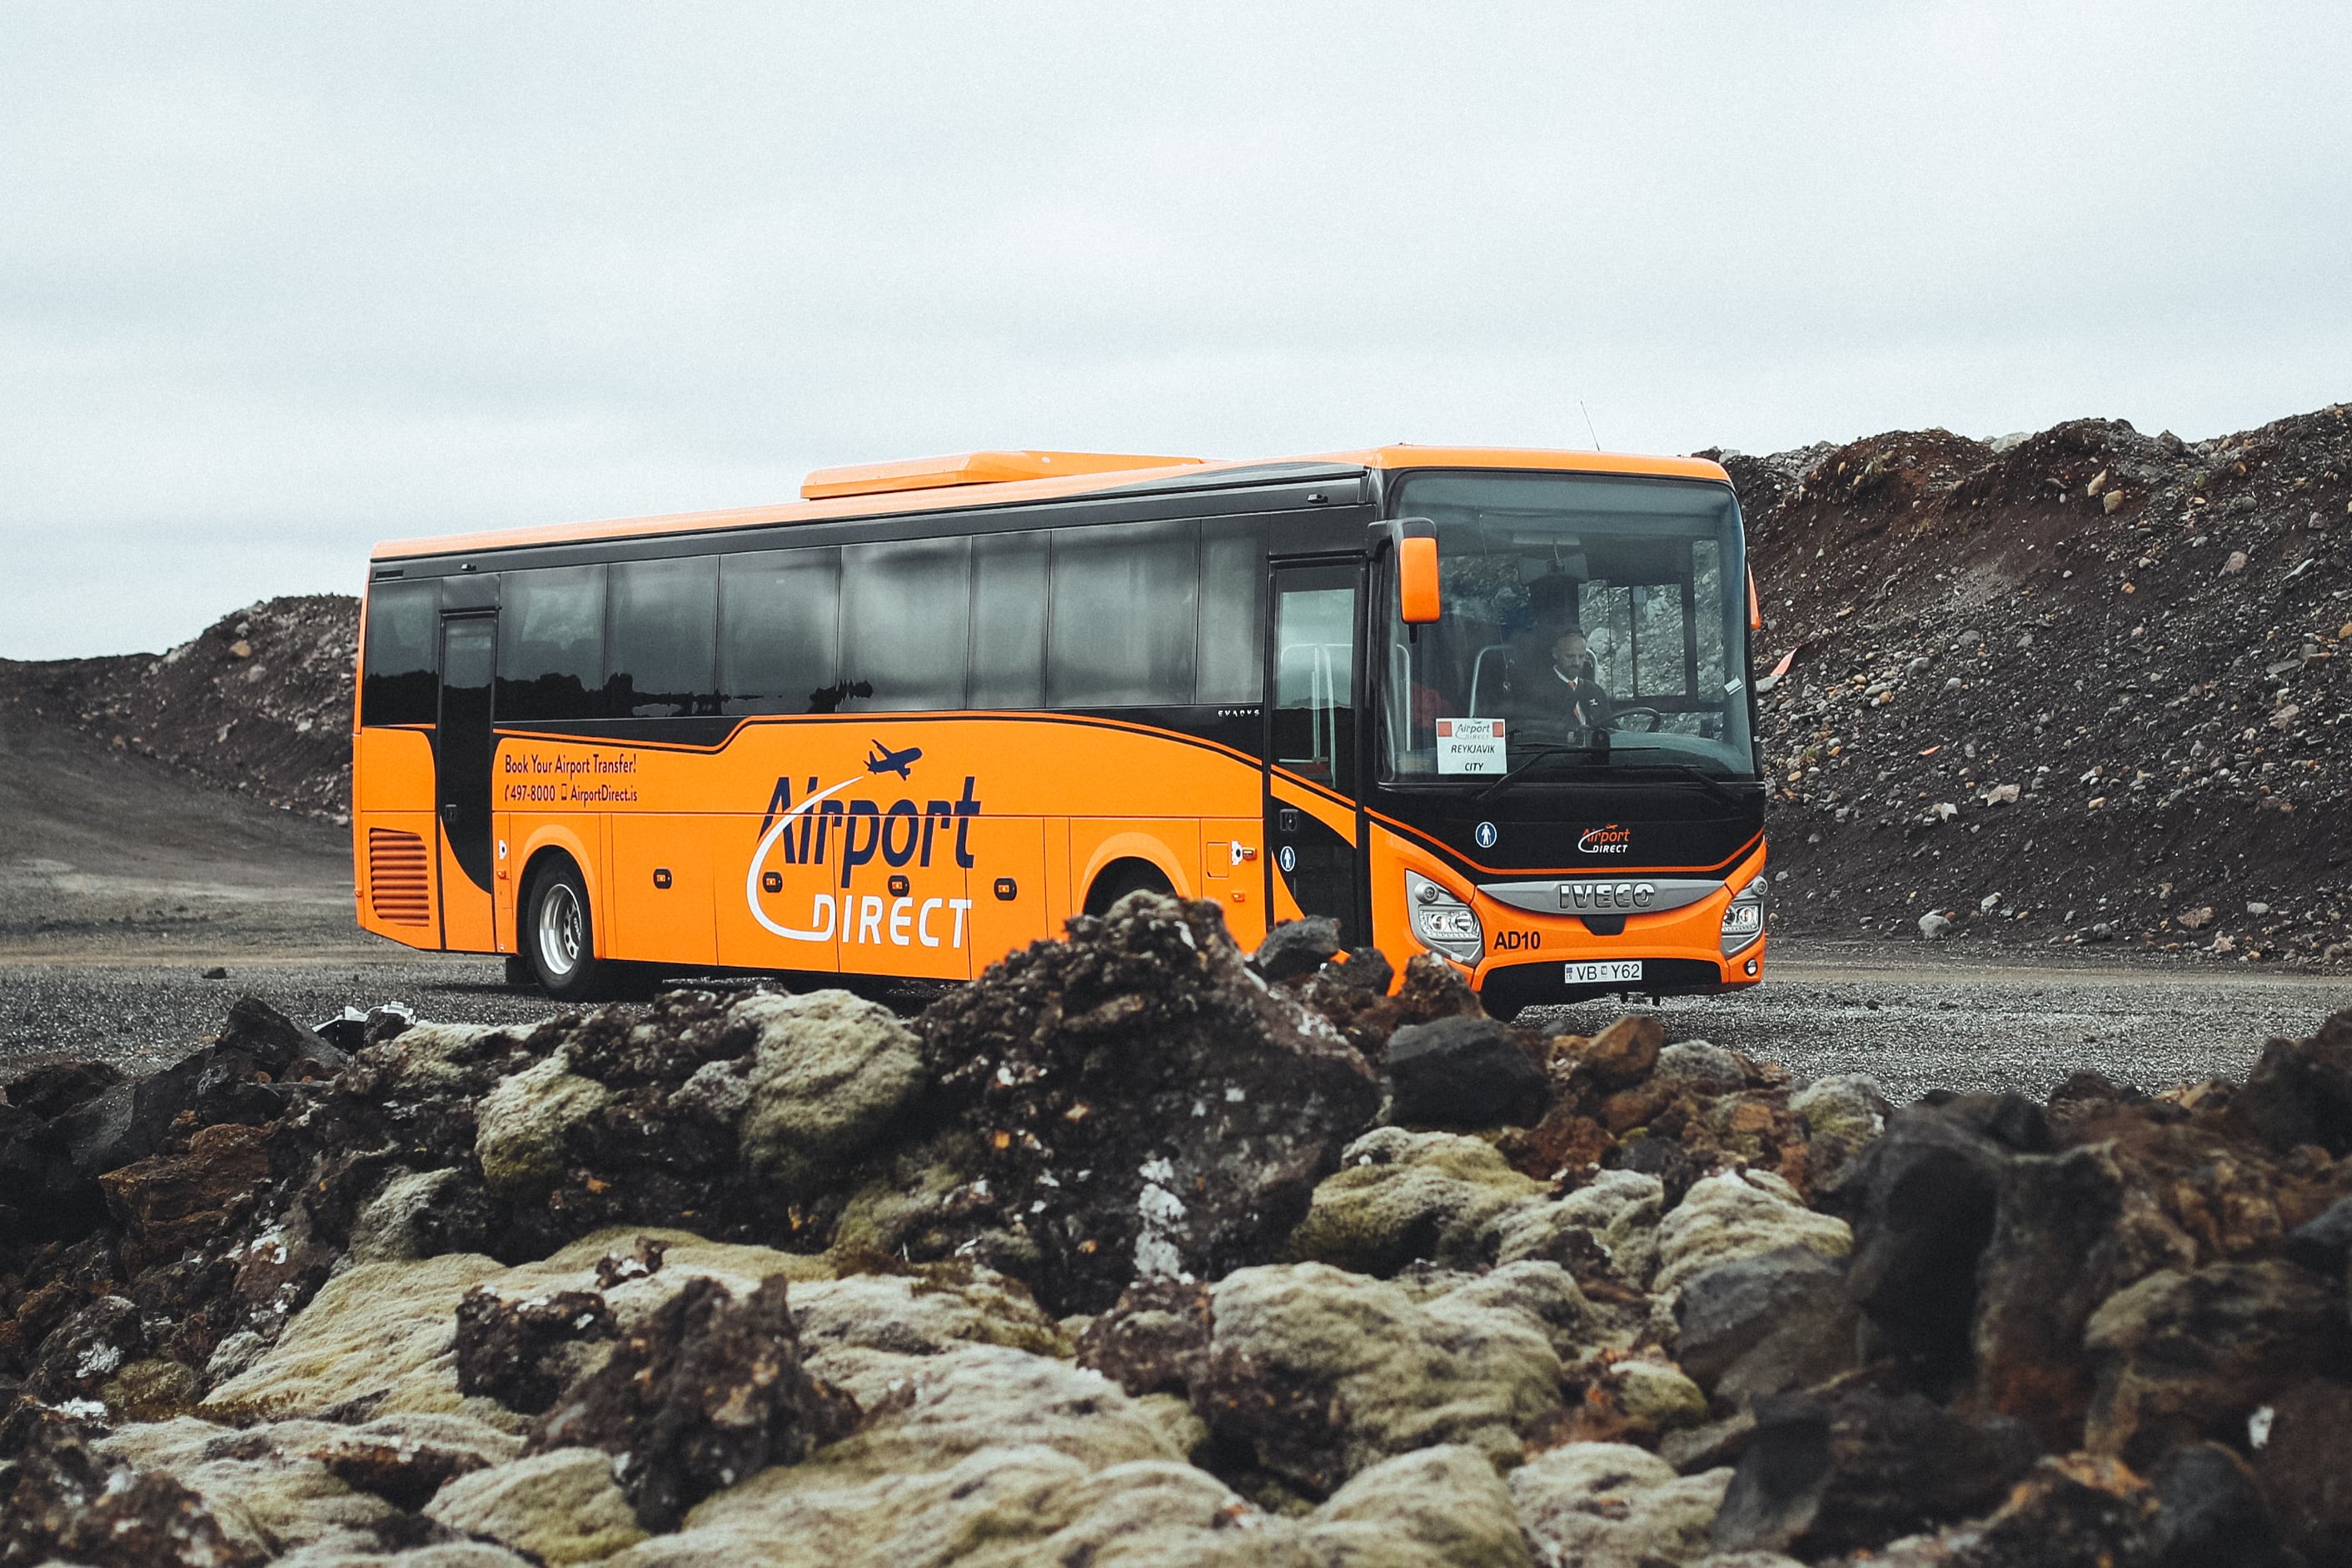 Airort direct bus on a road through a lava field